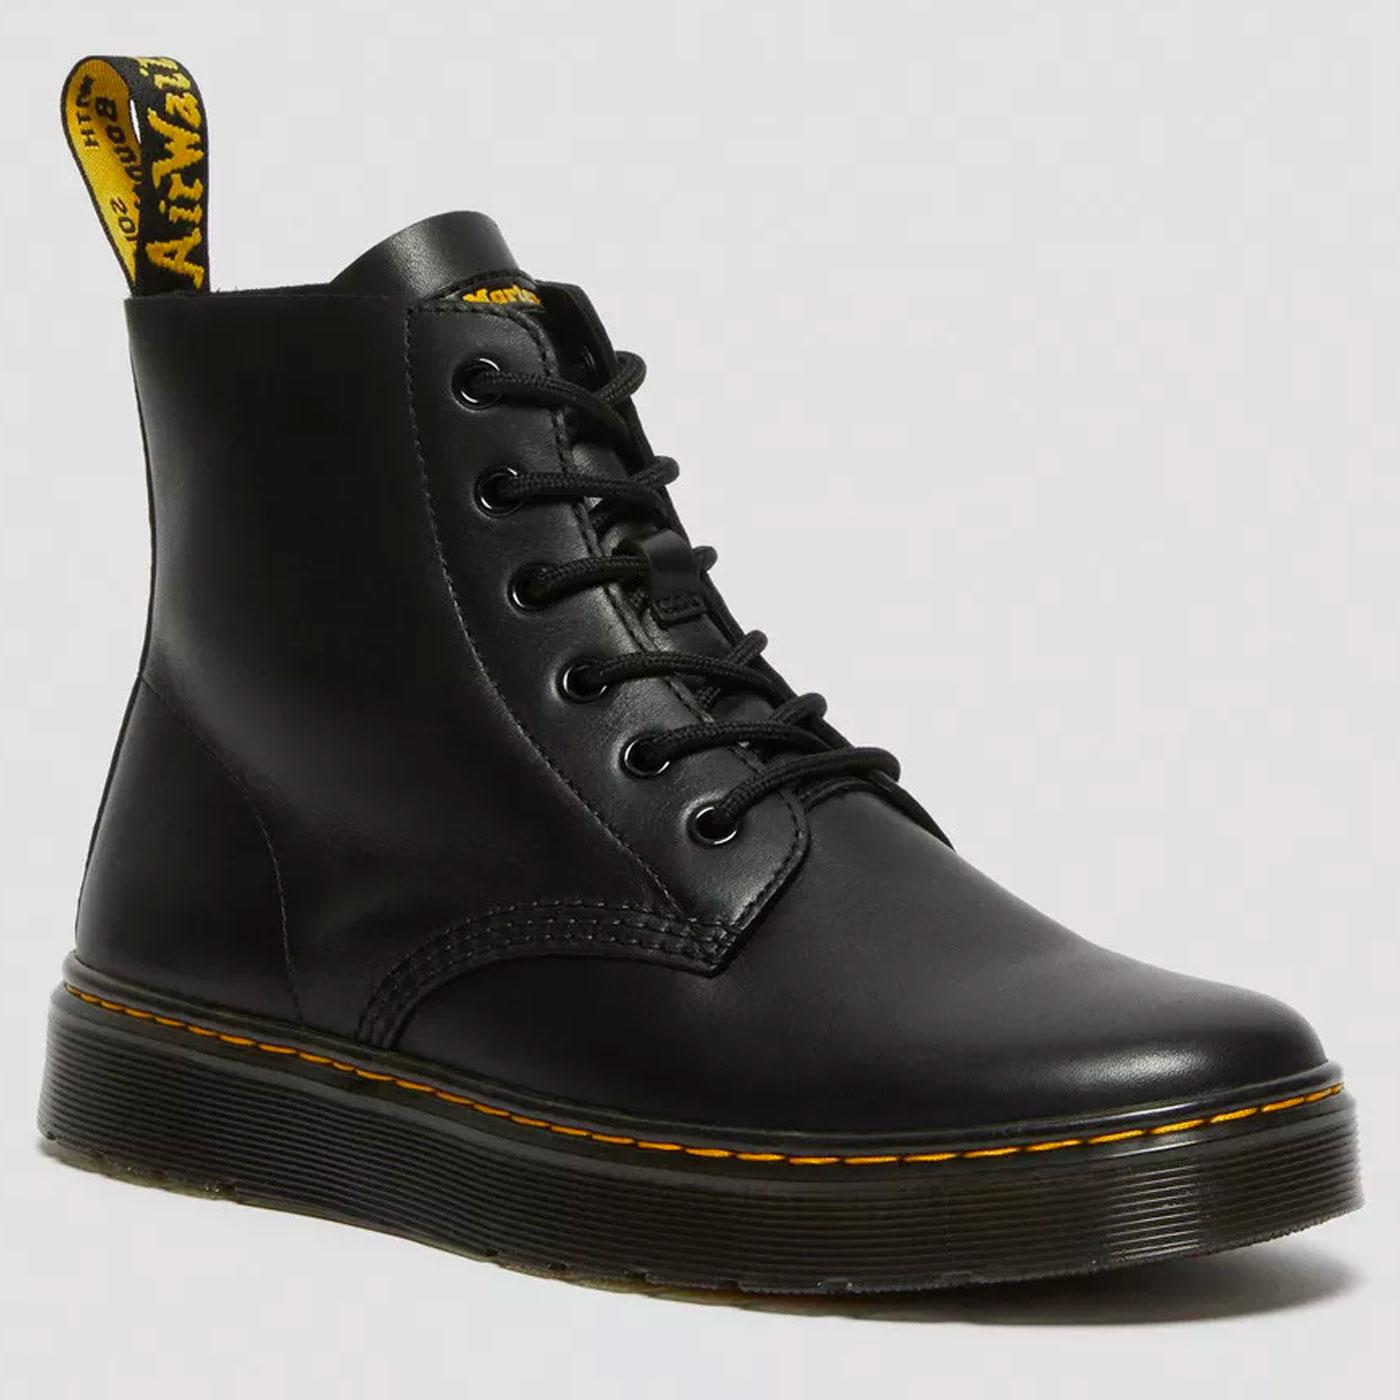 DR MARTENS Thurston Lusso Leather Mod Chukka Boots Black